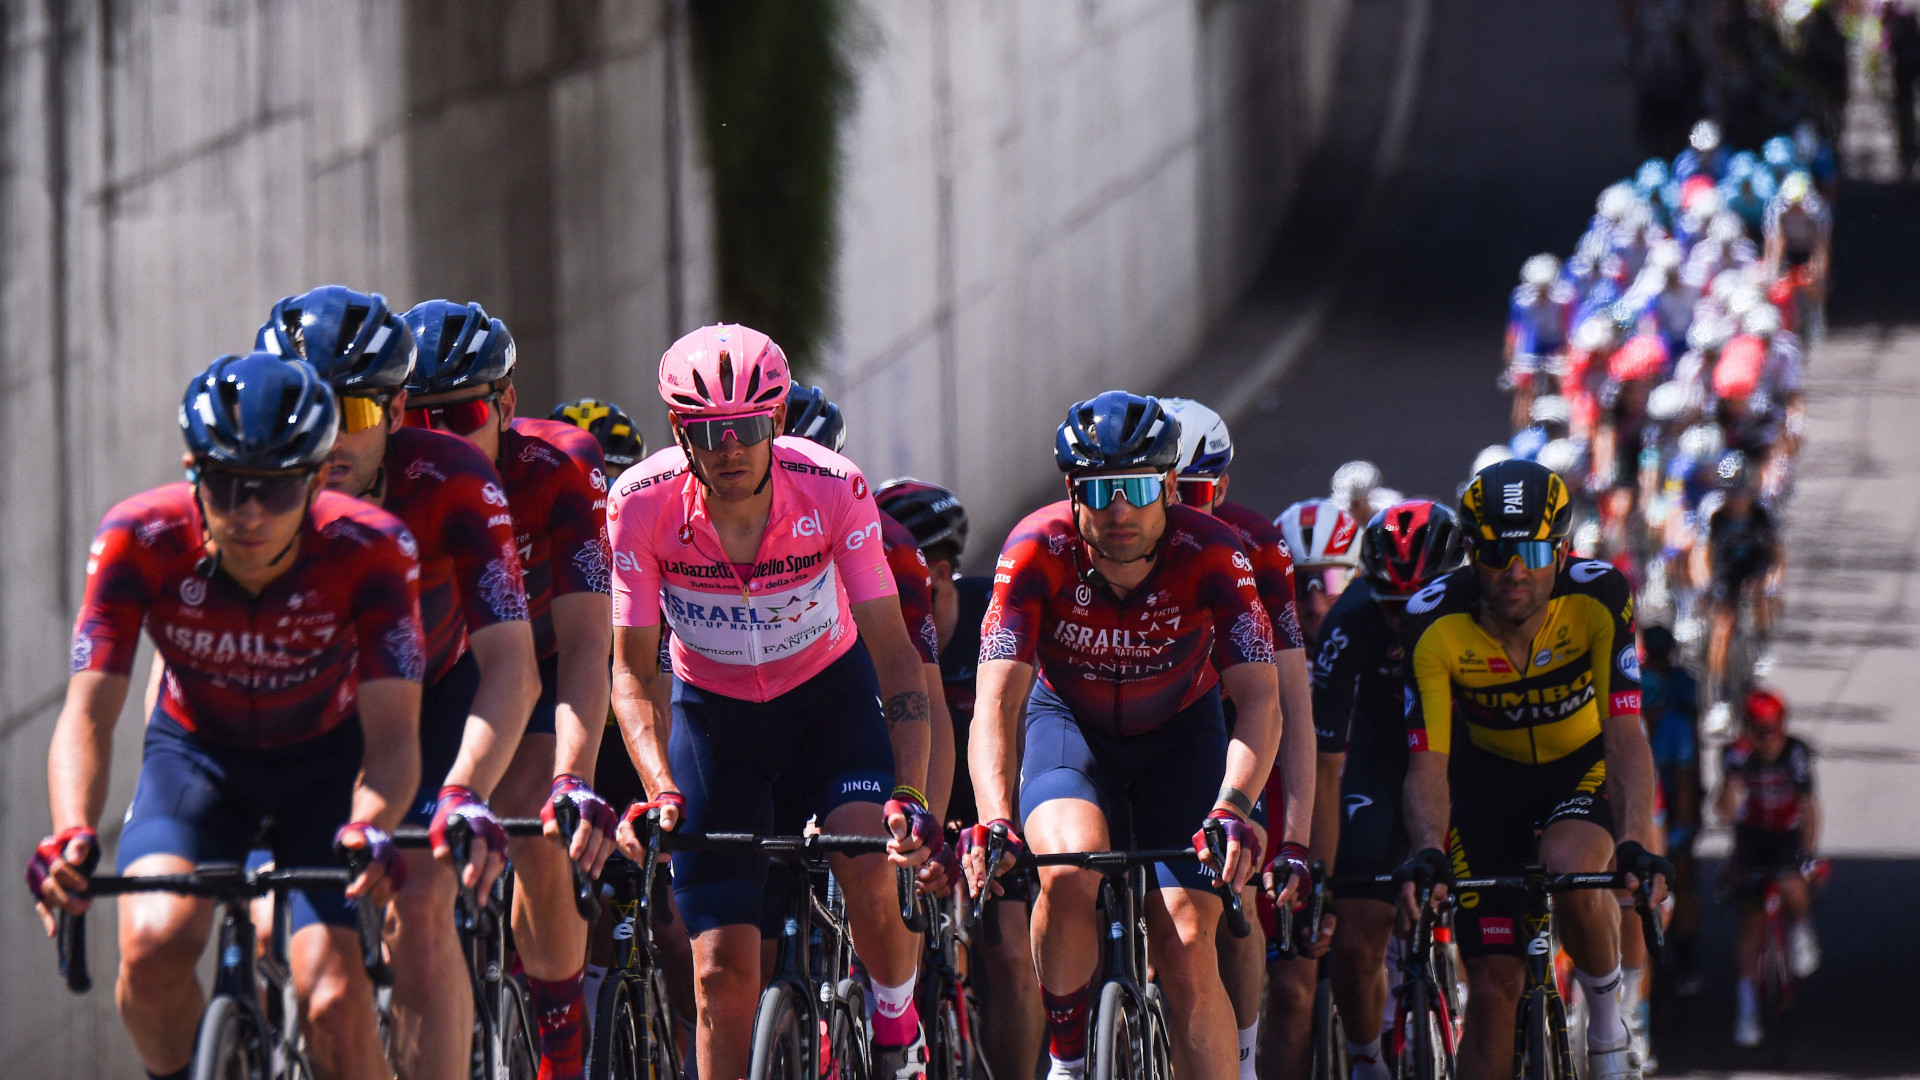 Giro d'Italia live stream 2022 how to watch the cycling free online